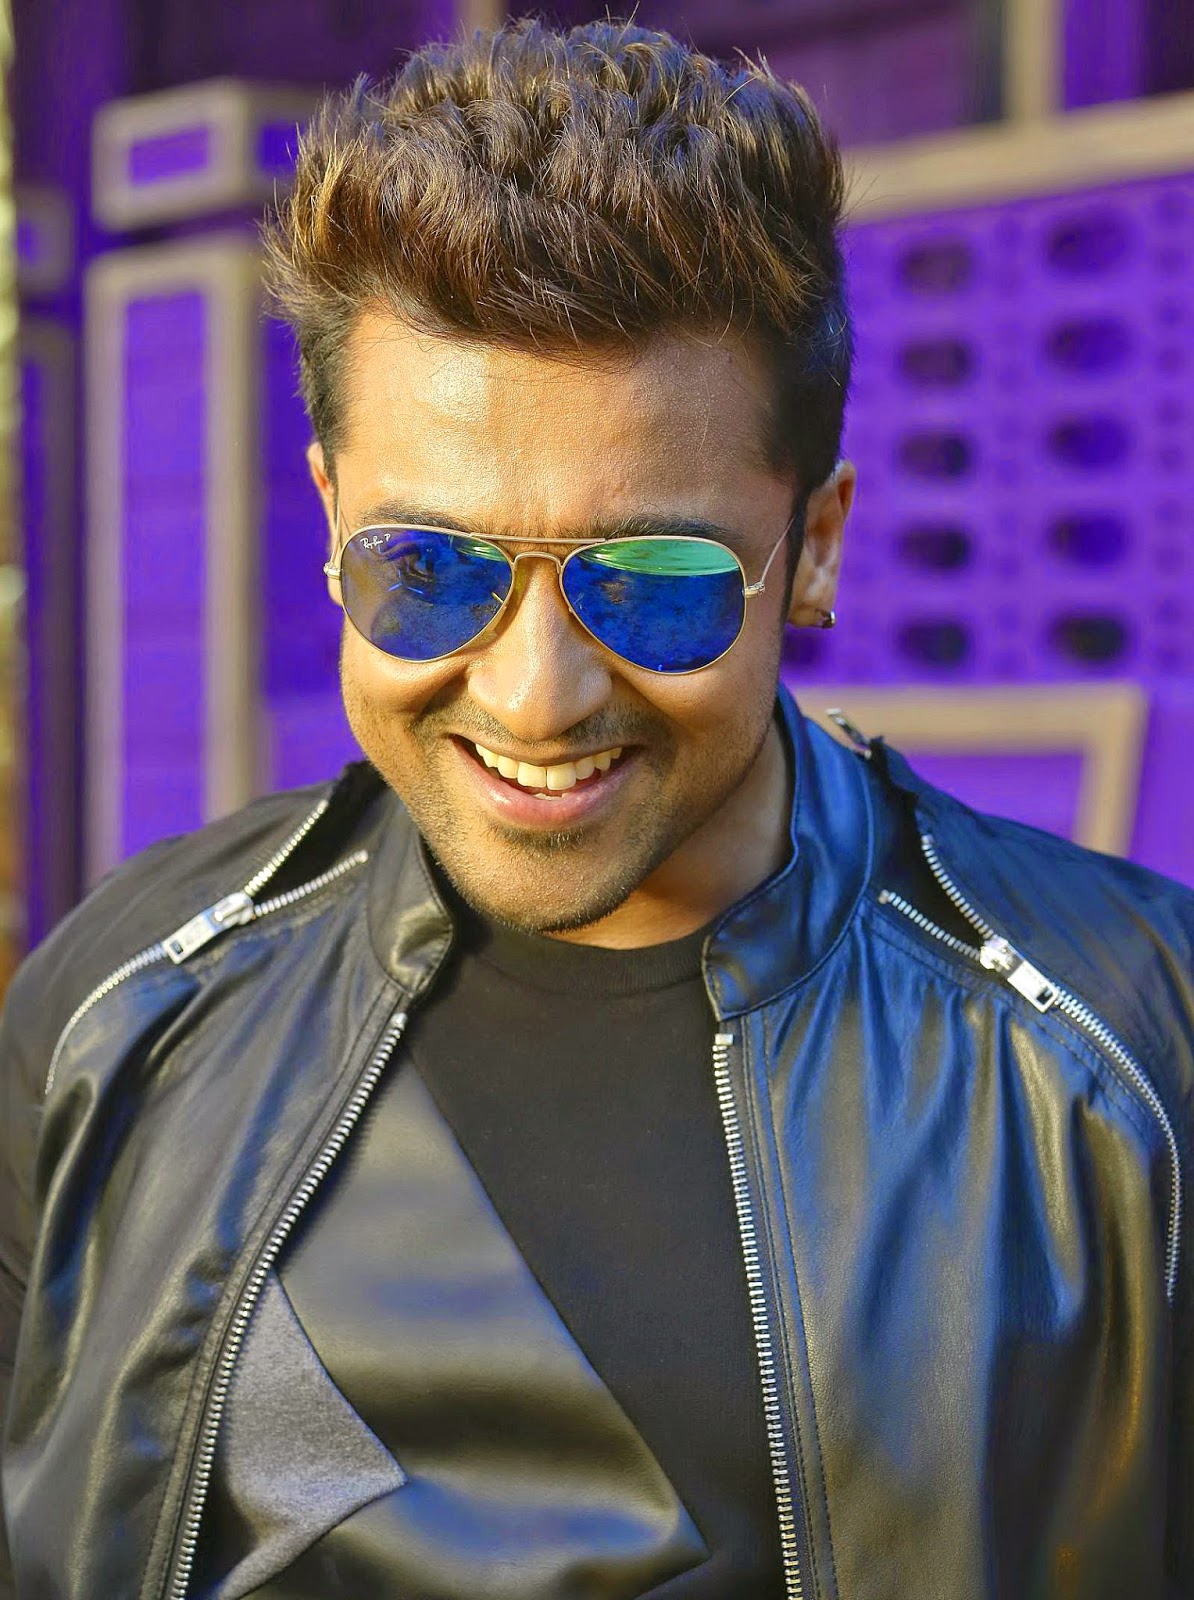 HQ Picture Gallery | Download Wallpaper | Actors Actress Images: Latest HD  Images Of Surya From Mass Movie | Masss Movie New Pics Of Surya | Masss  Exclusive Images Of Surya